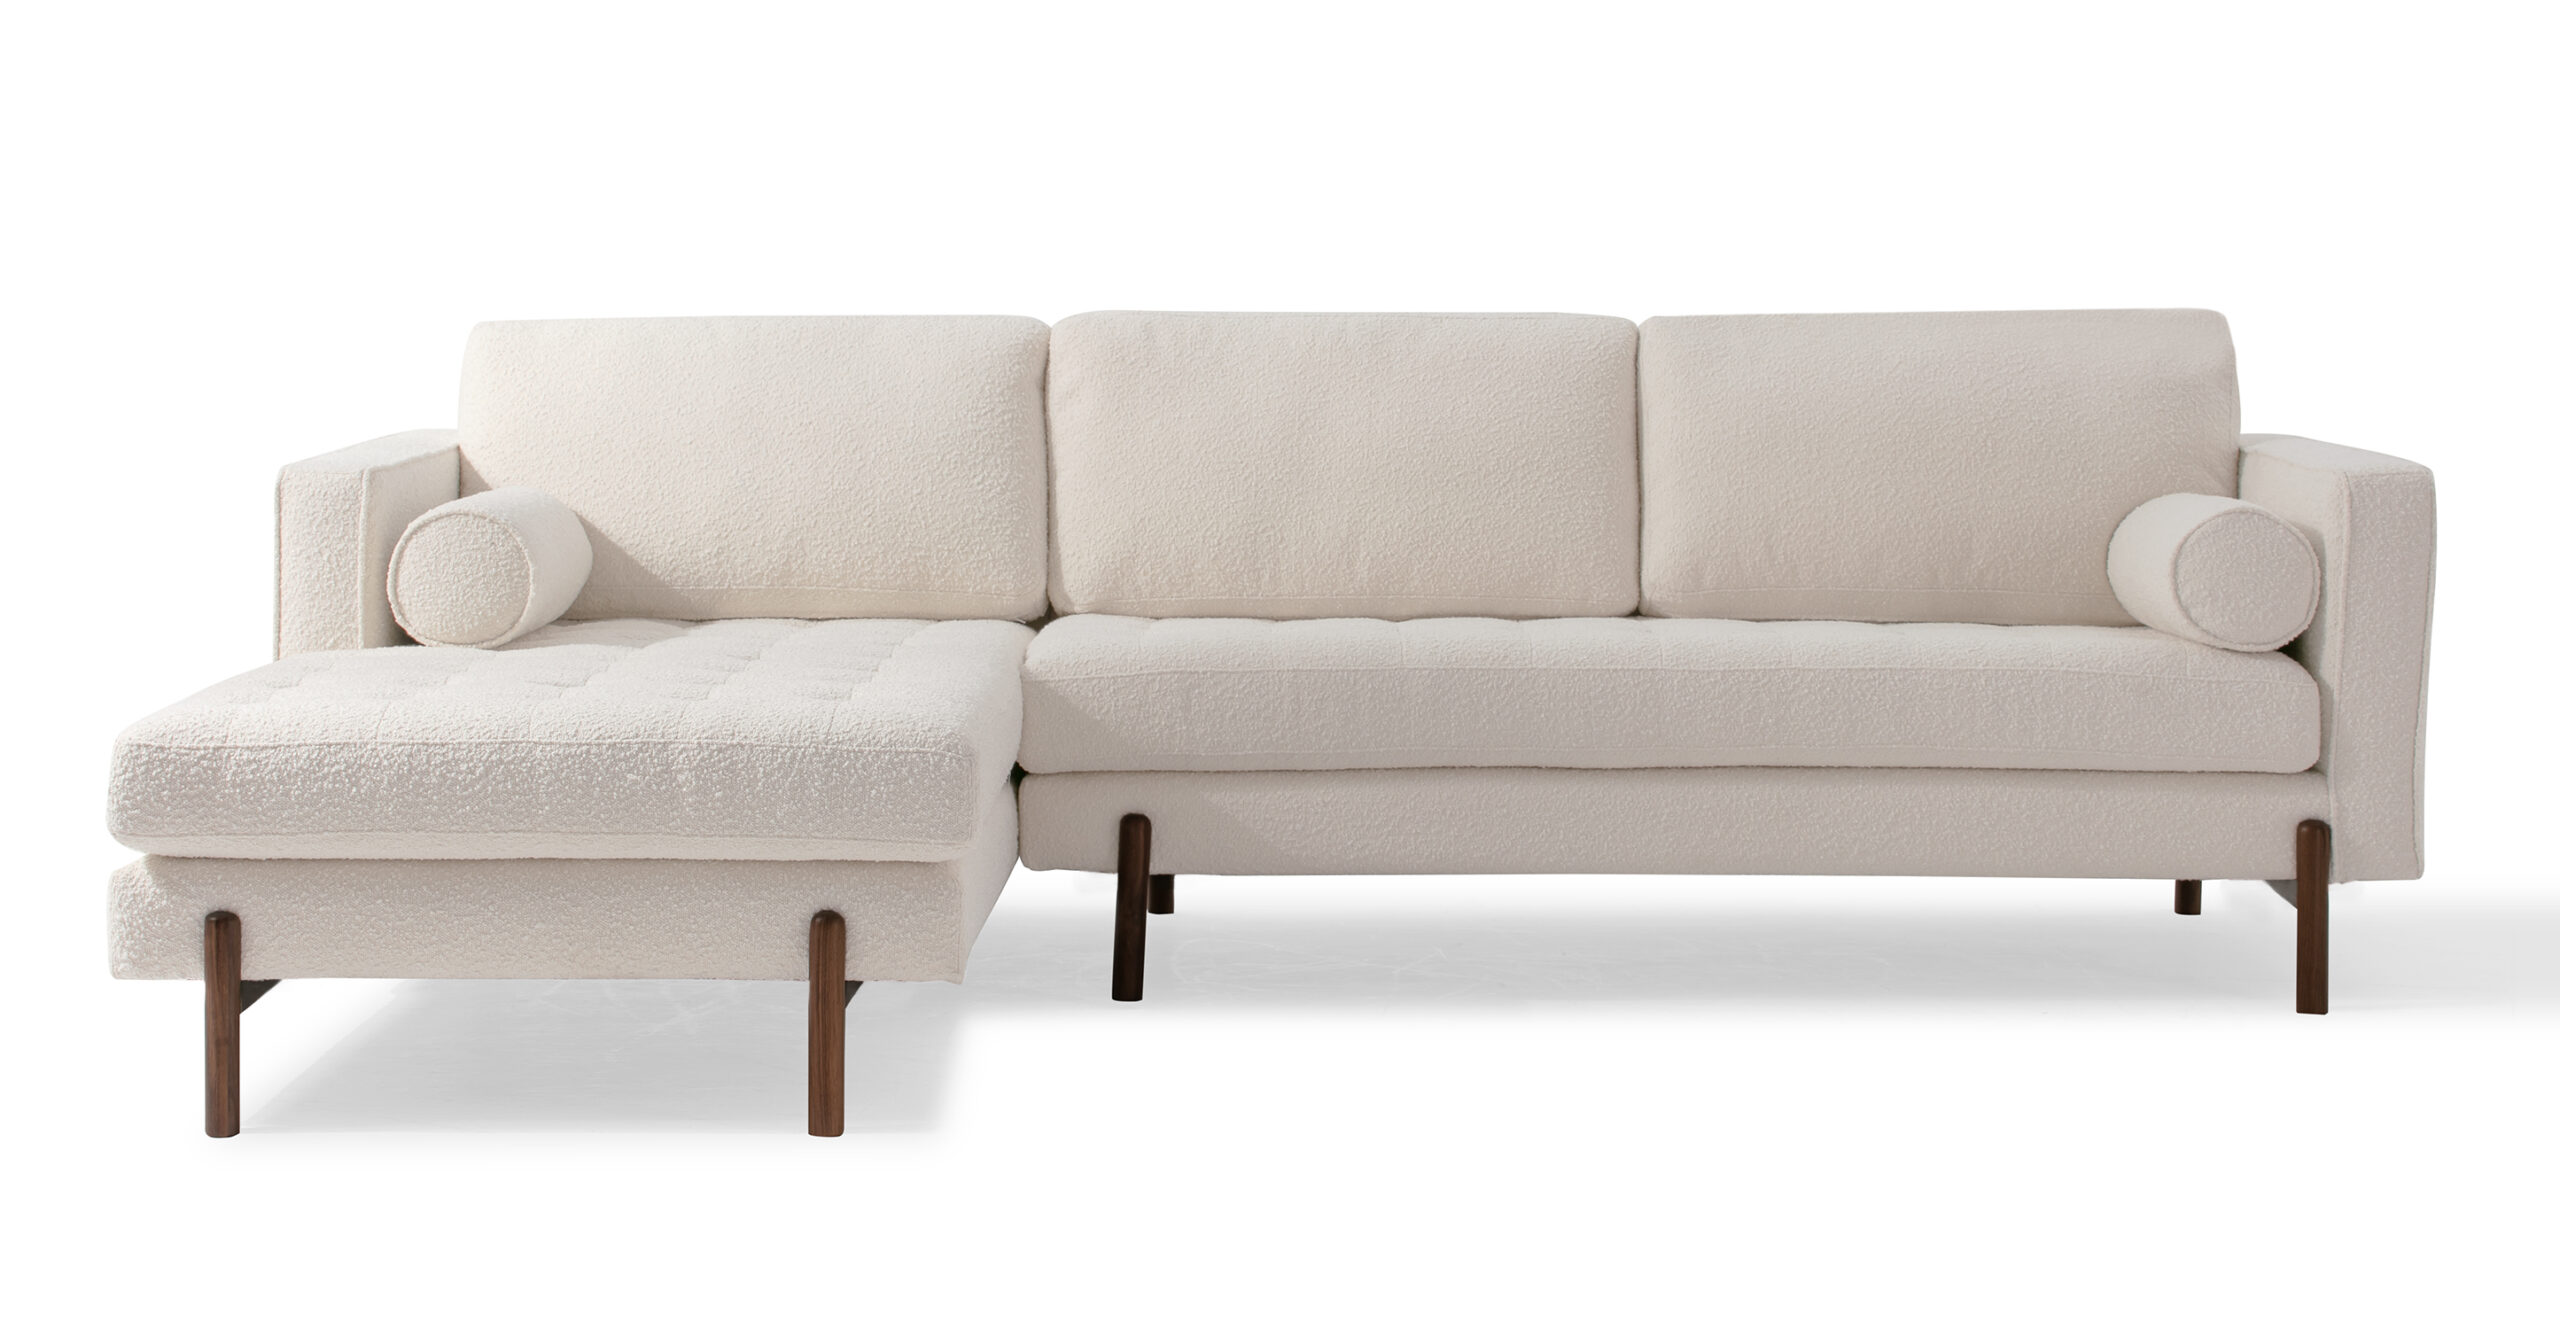 Dwell Studio the Willow Sectional